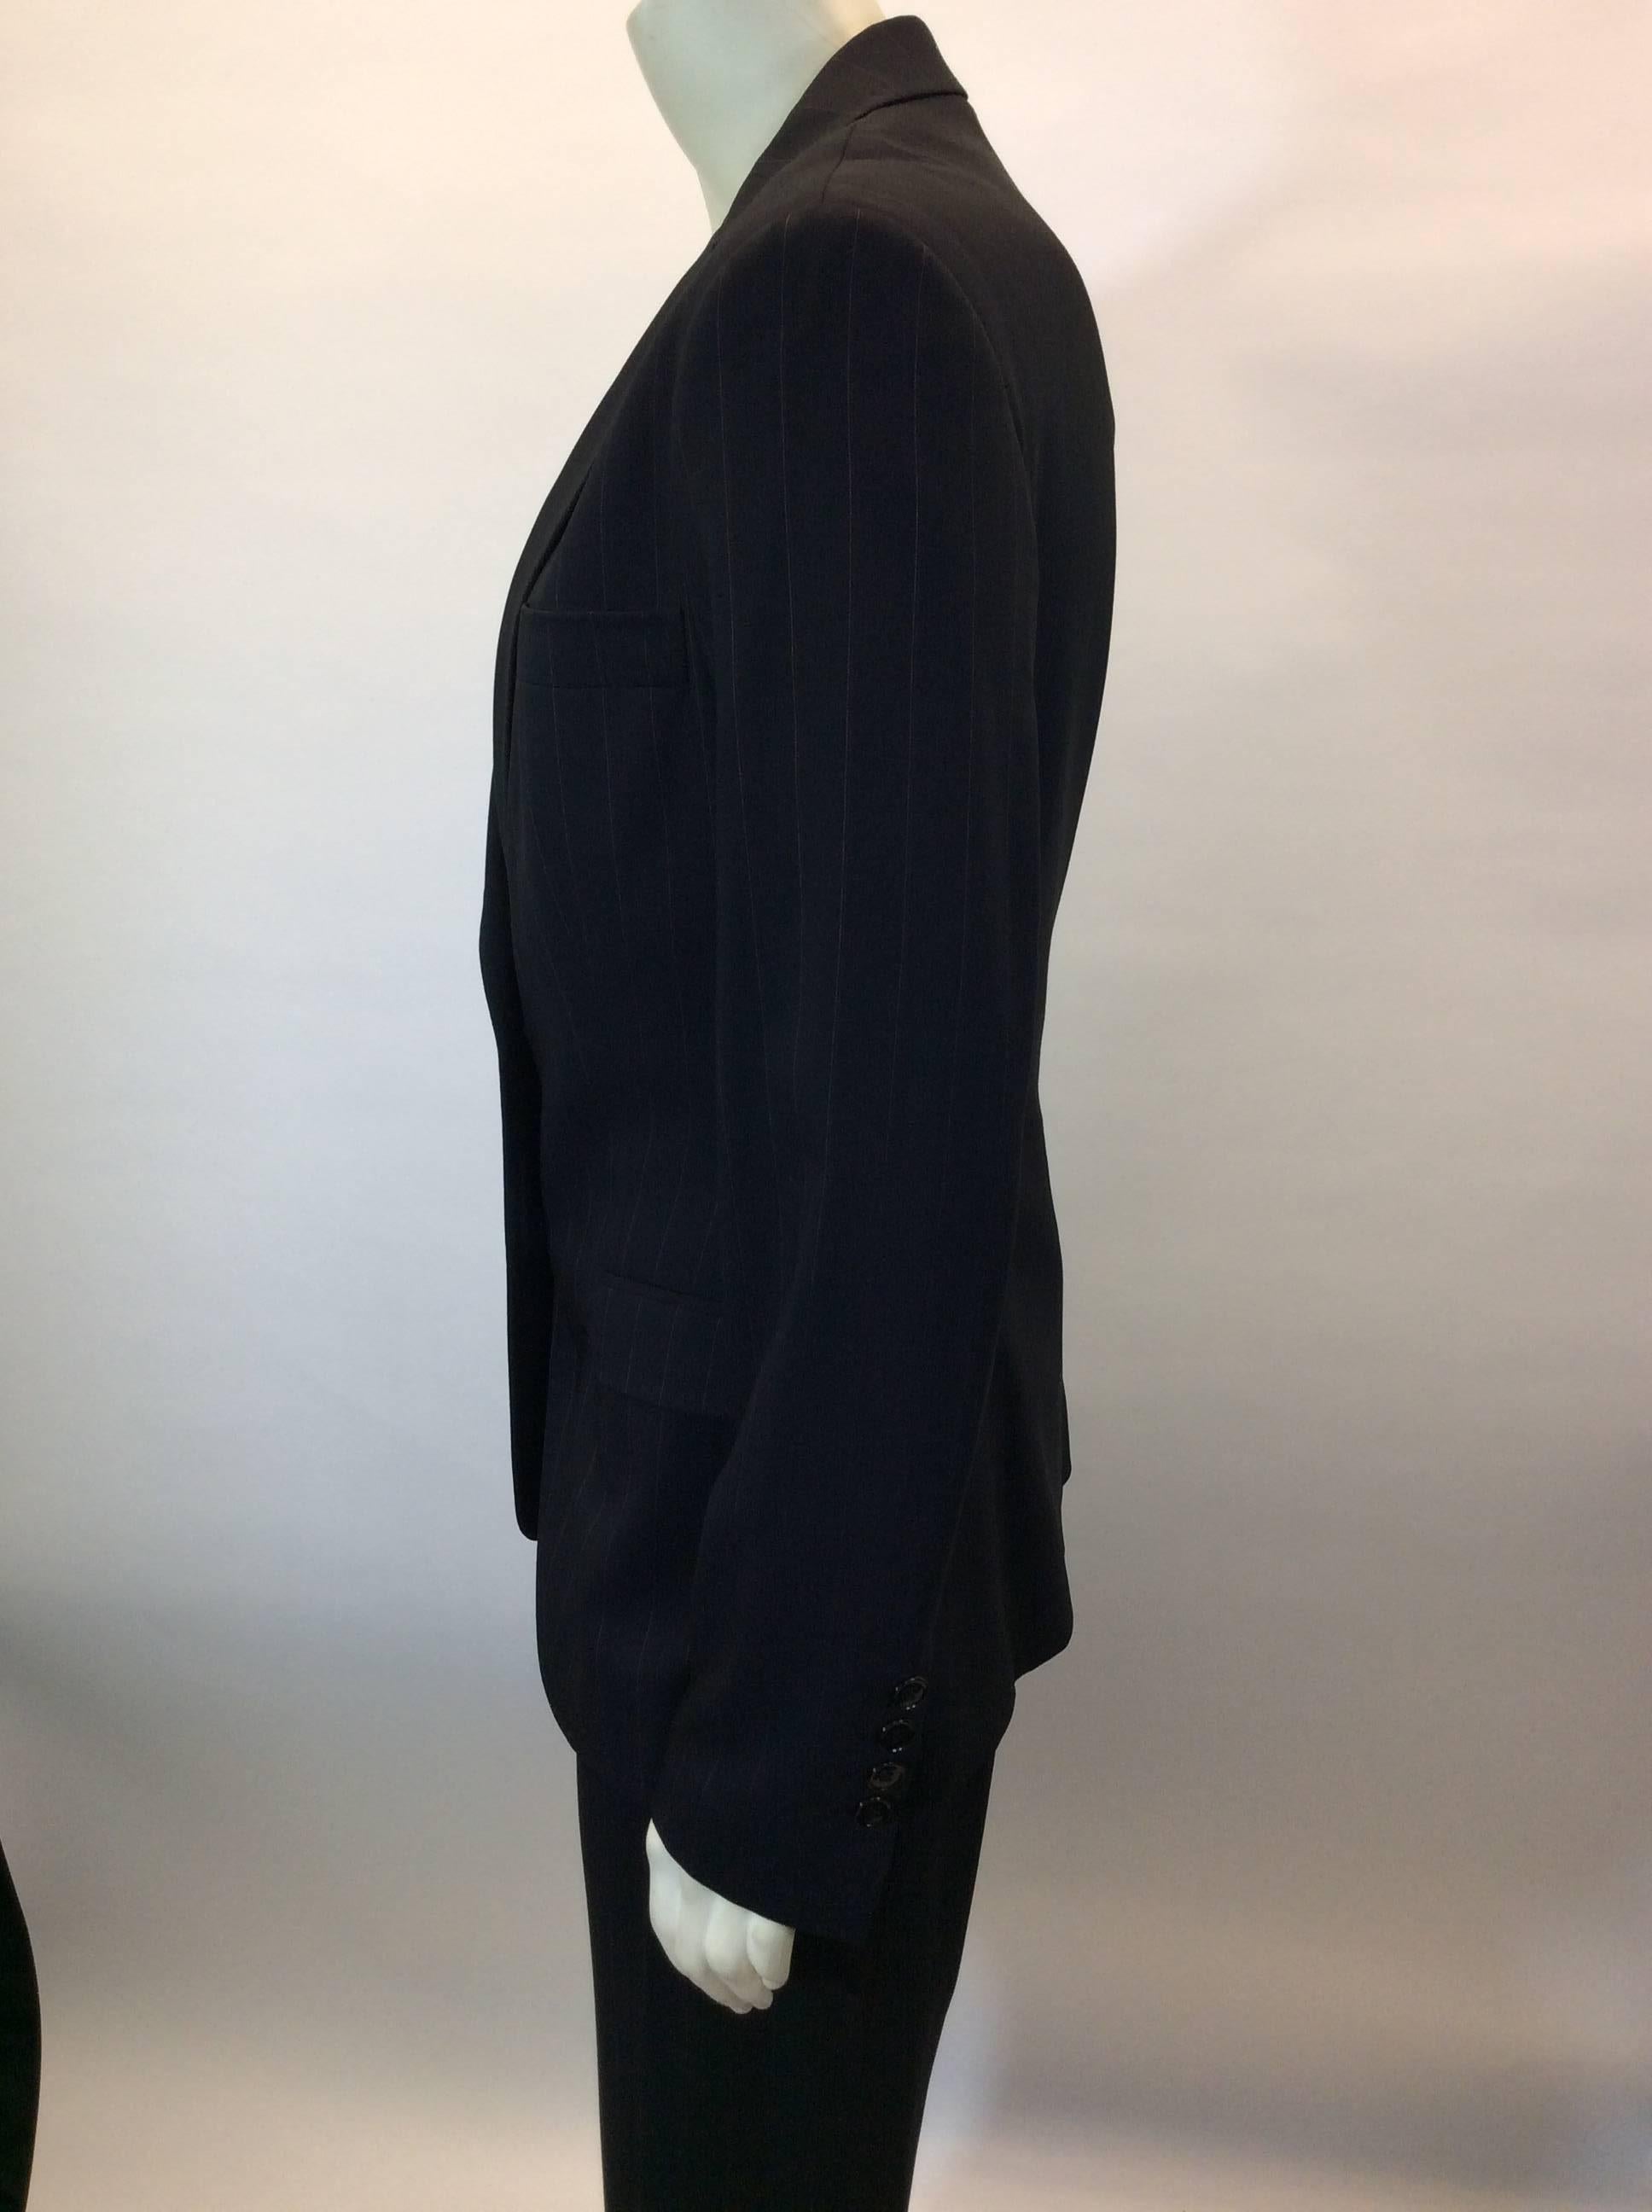 Dolce & Gabbana Black Pantsuit with Red Toned Pinstripes In Excellent Condition For Sale In Narberth, PA